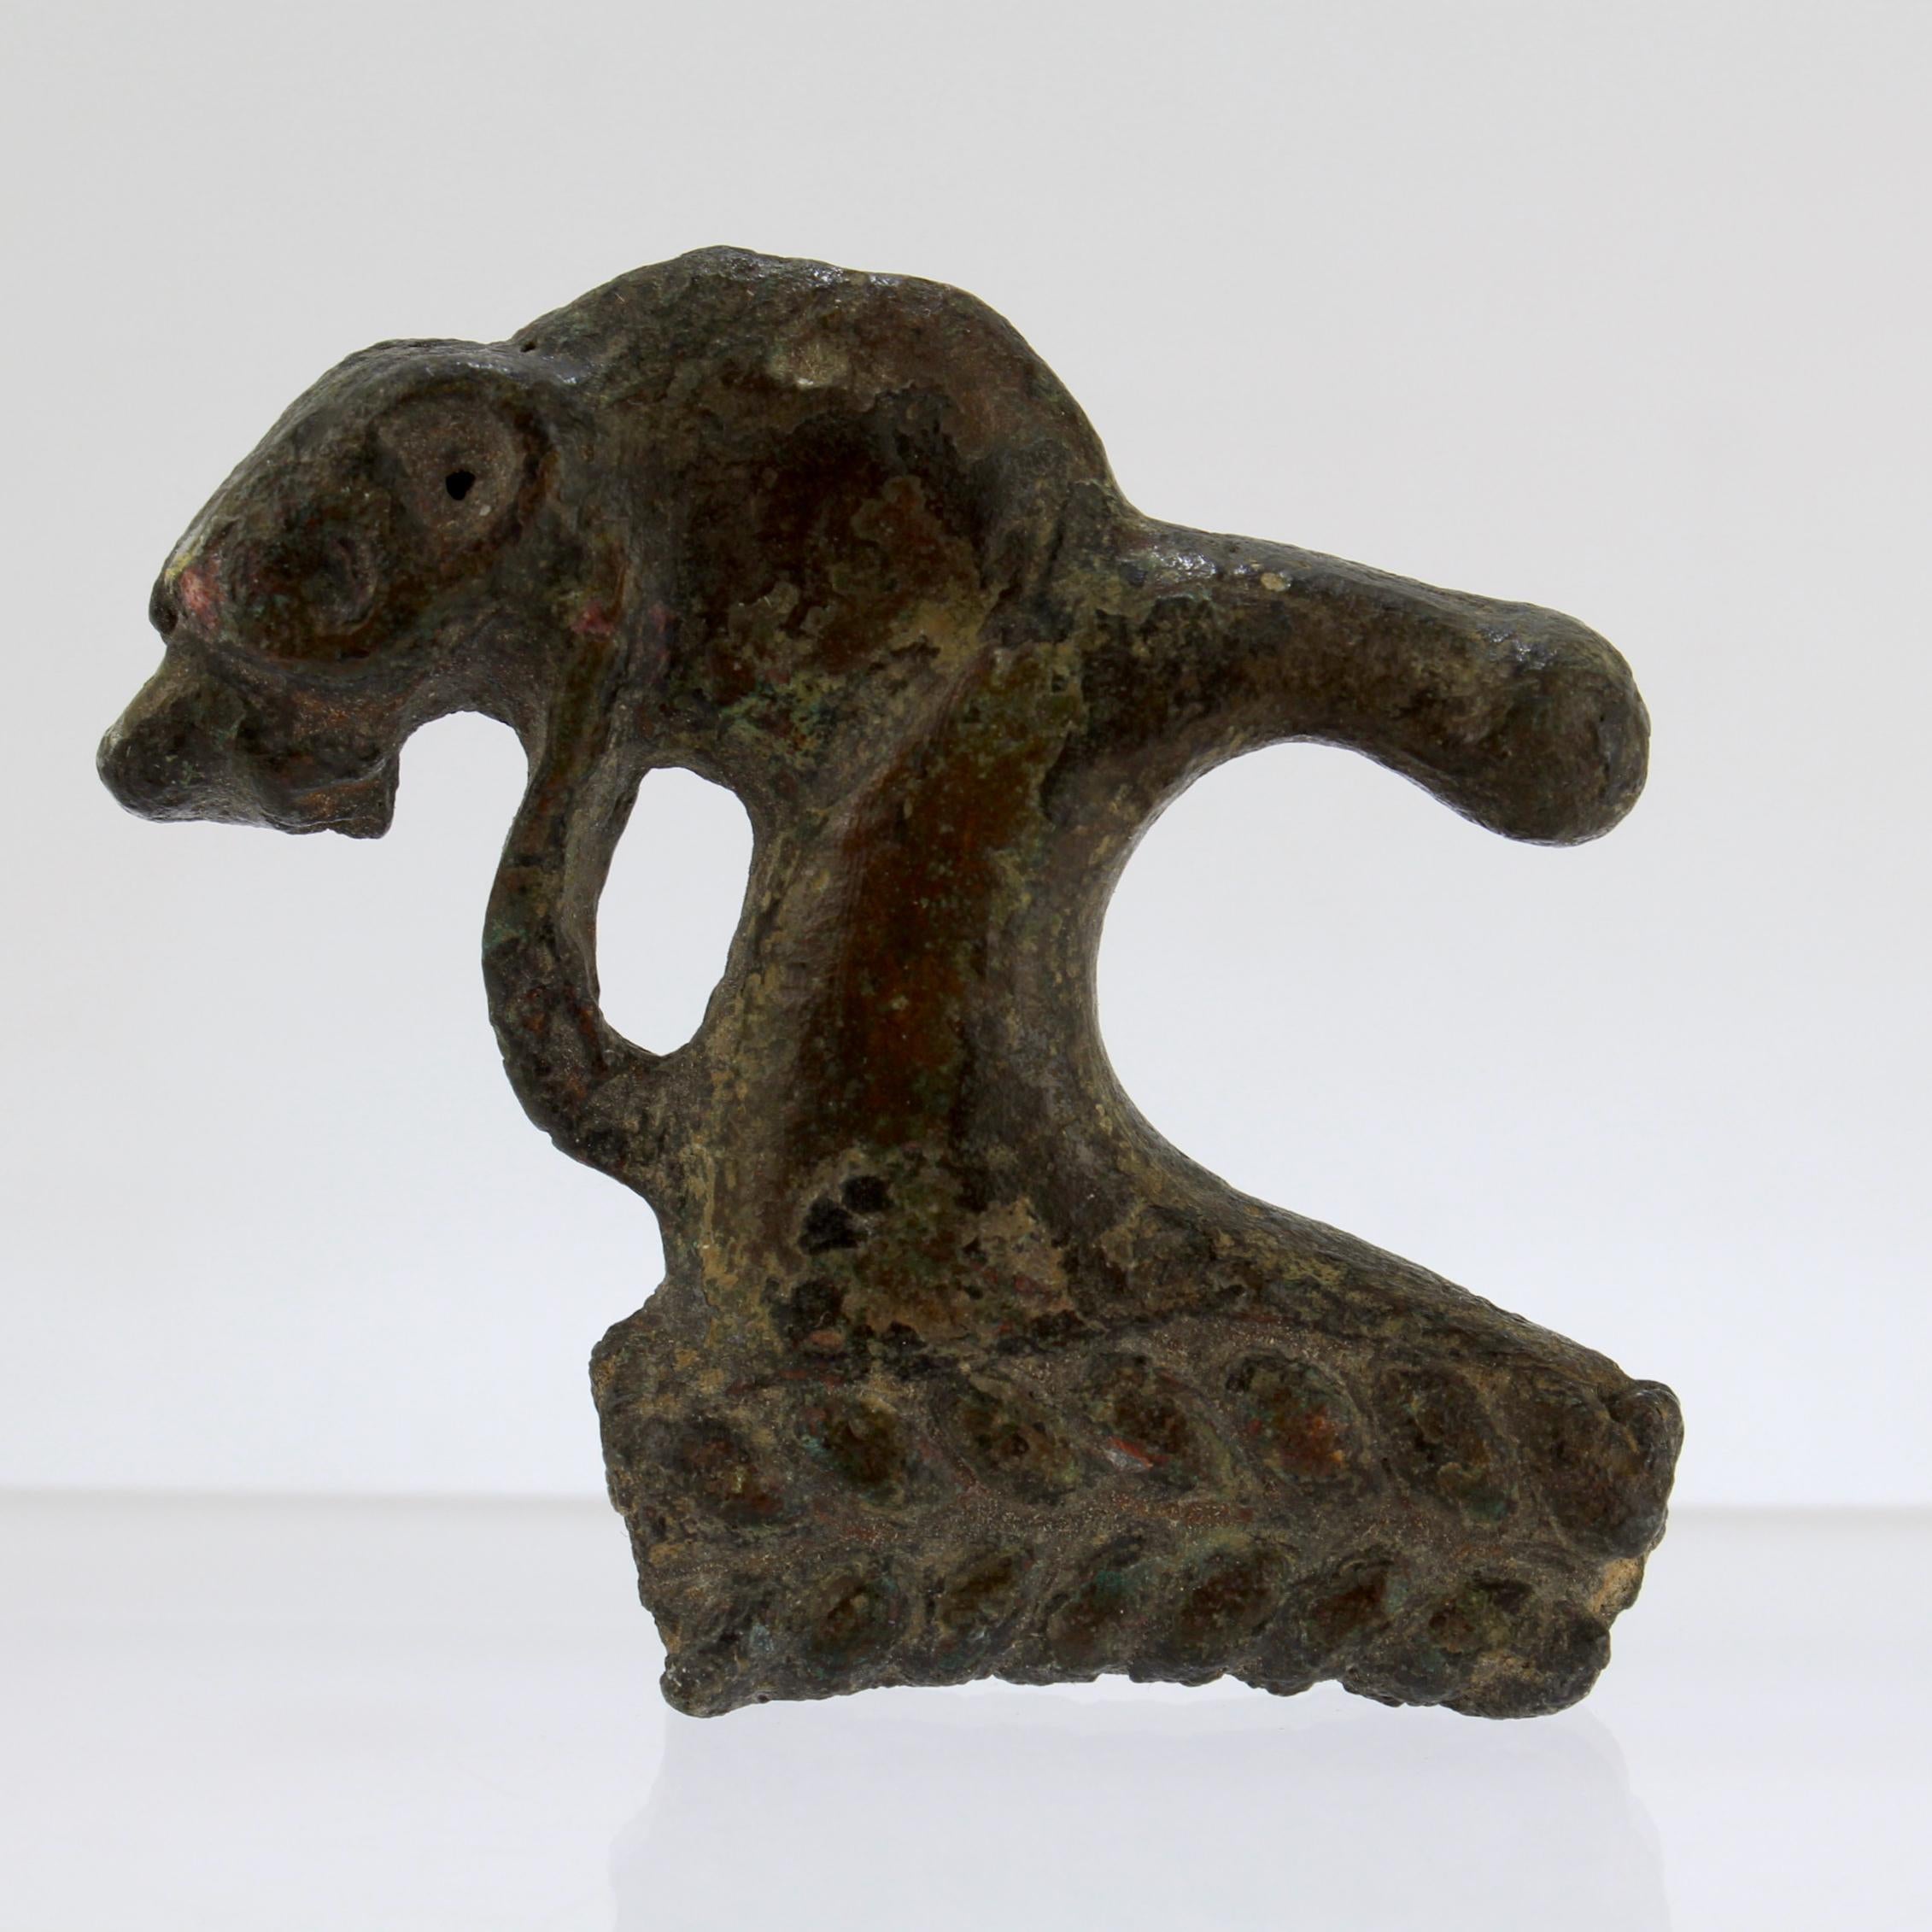 An antique or ancient Roman bronze element. 

This piece was an element of a vase or possibly handle to something larger. 

It has the head of a wolf or lion mounted on a curved handle supported by a section of braided ring. 

With a thick